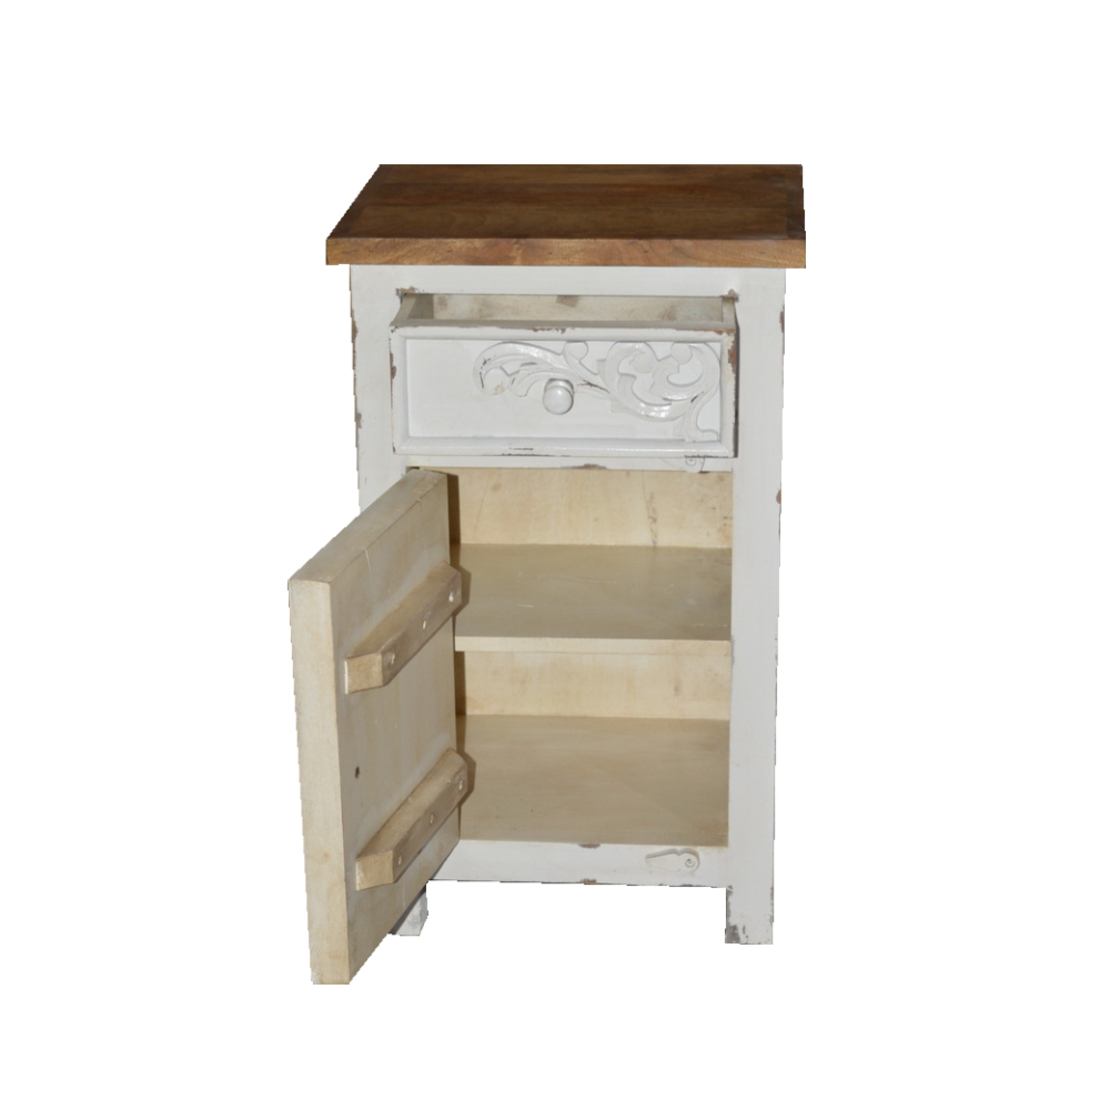 SYROS NIGHTSTAND 1DOOR 1DRAWER SOLID WOOD MANGO WHITE NATURAL IN